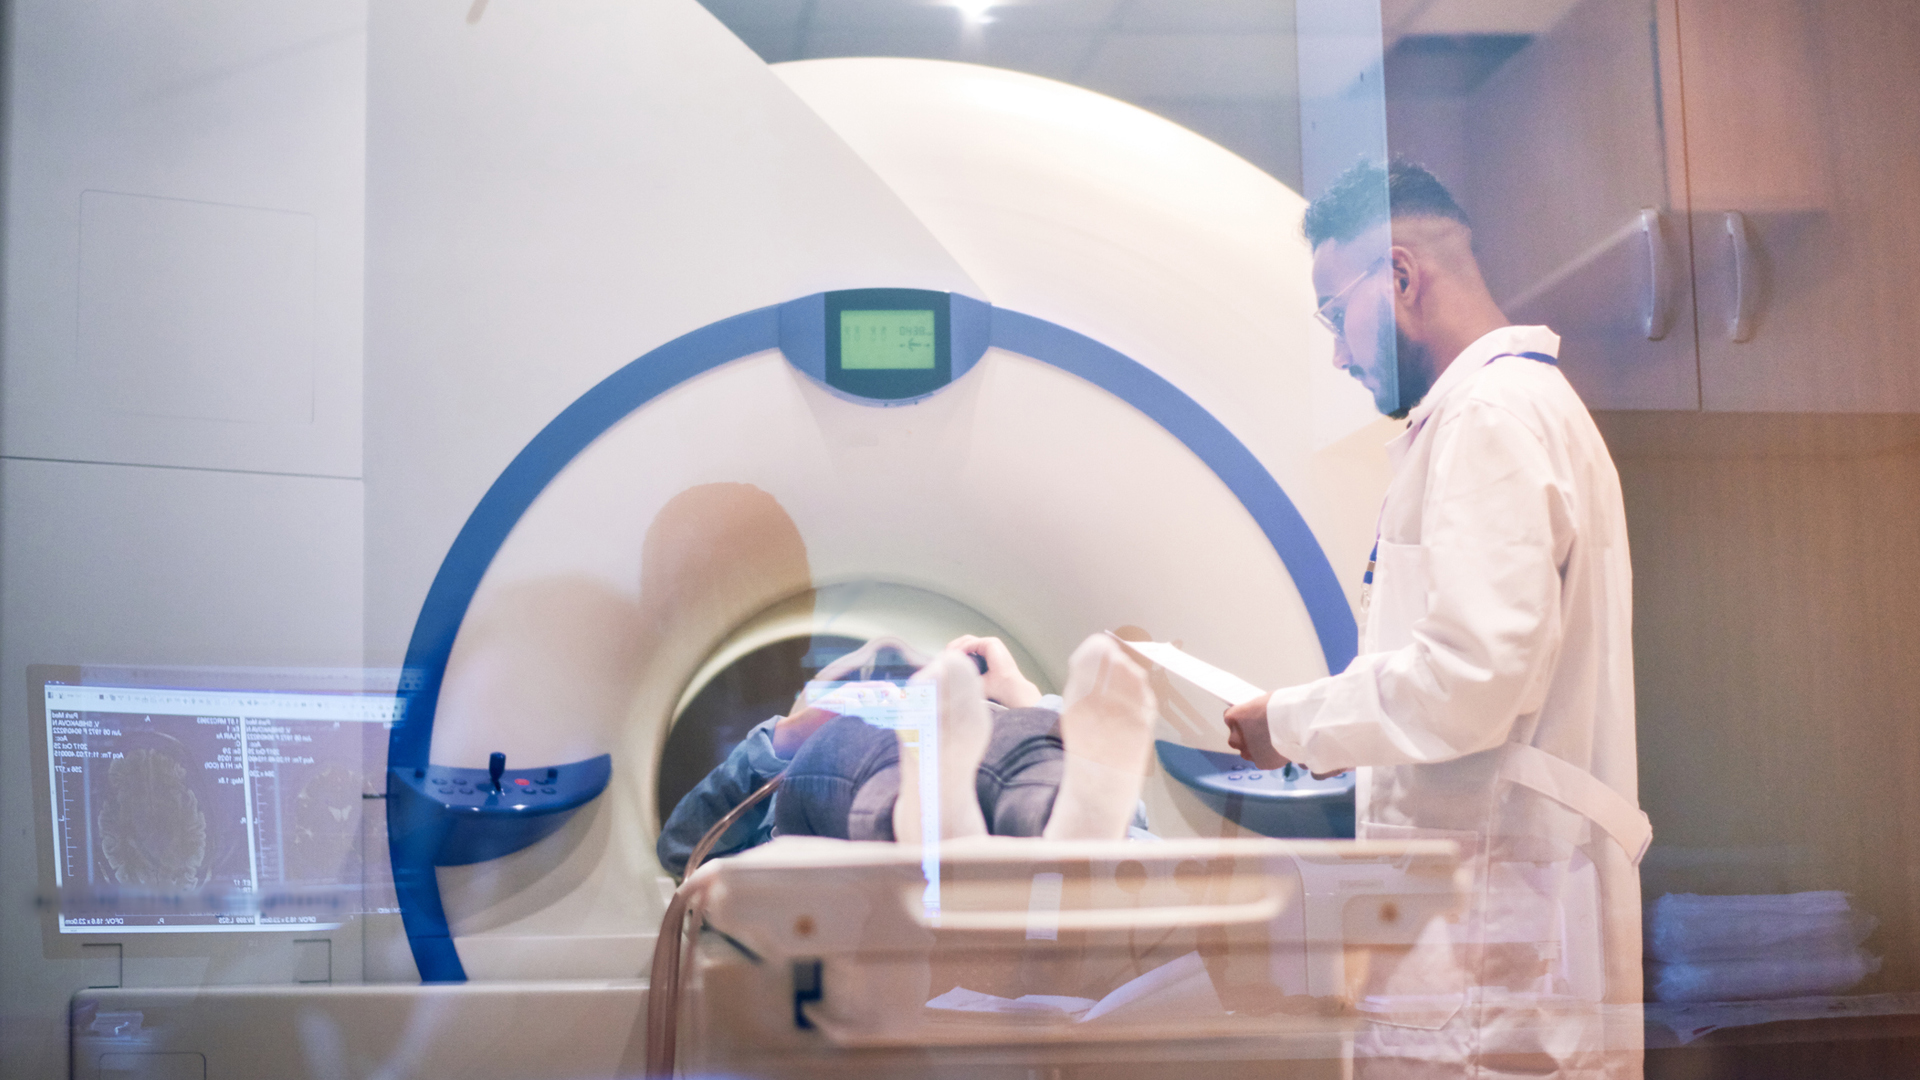 MRI measurement of the breast could reduce the biopsy rate in breast cancer screenings by 30%